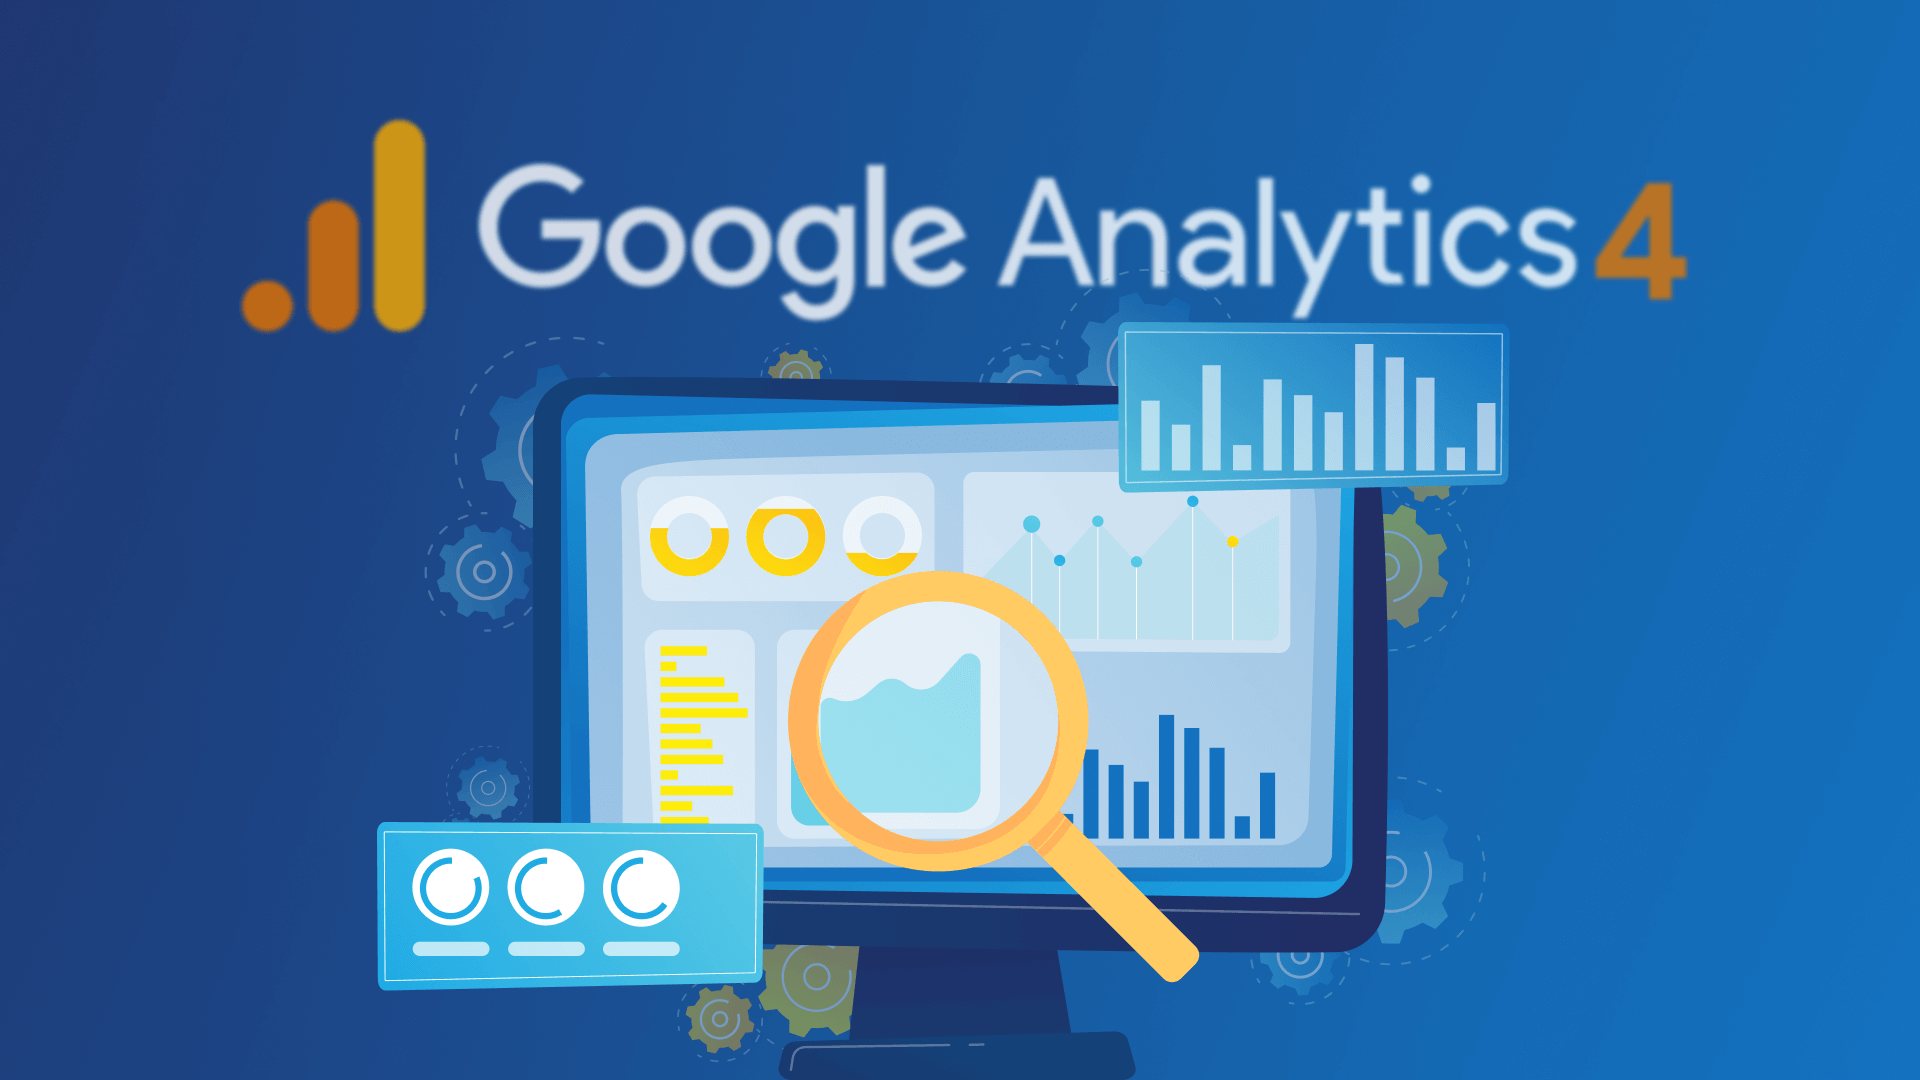 Google Analytics 4 Review - What's new and how to use it for your business